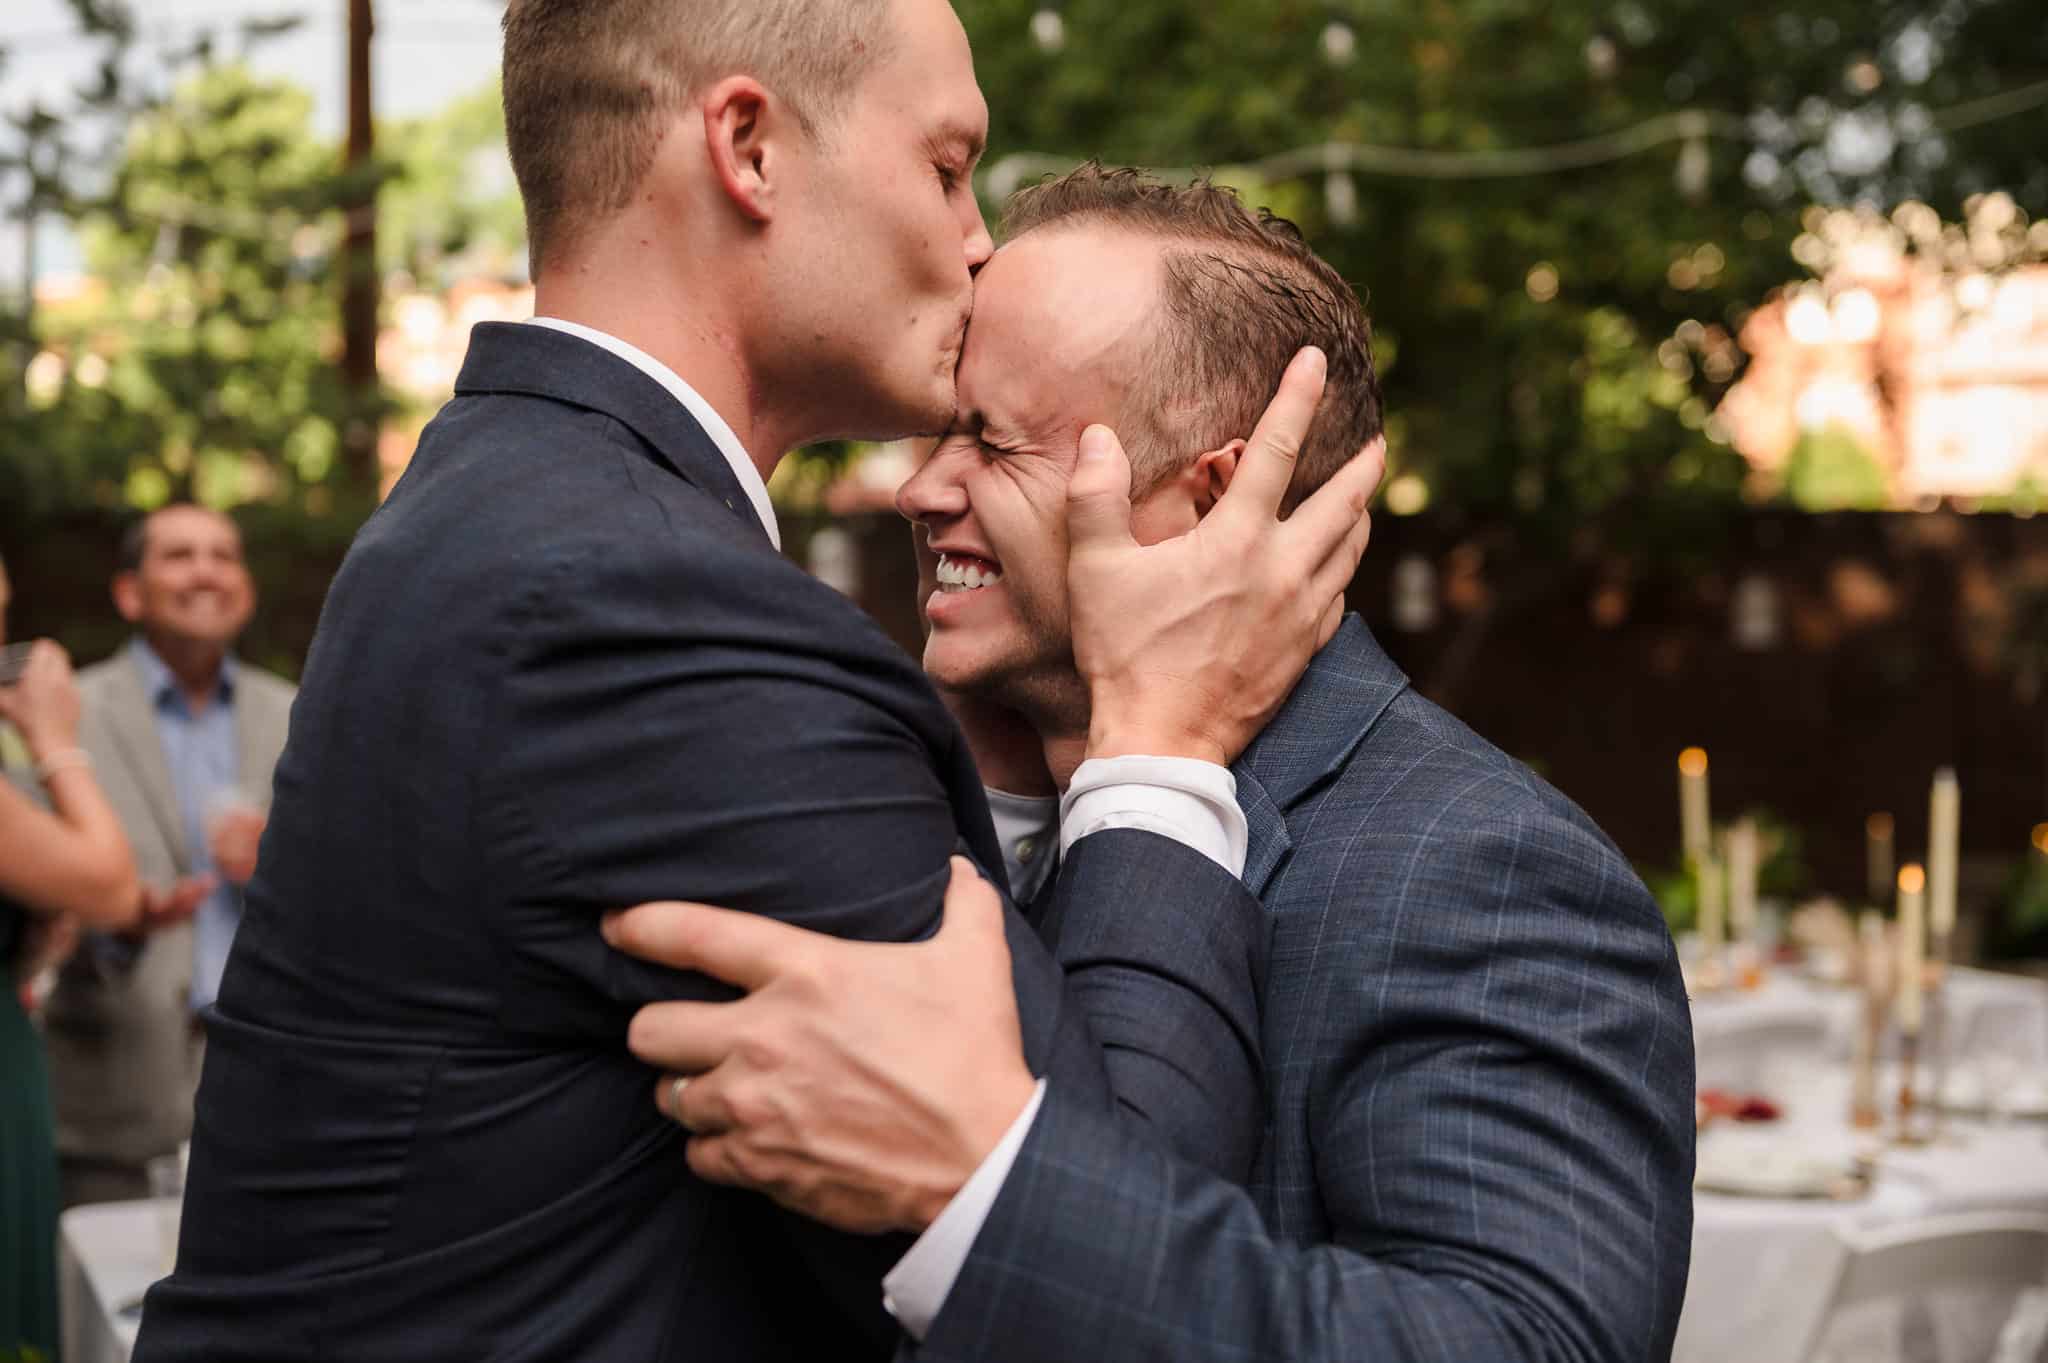 The groom receives a kiss from a bro on the forehead.